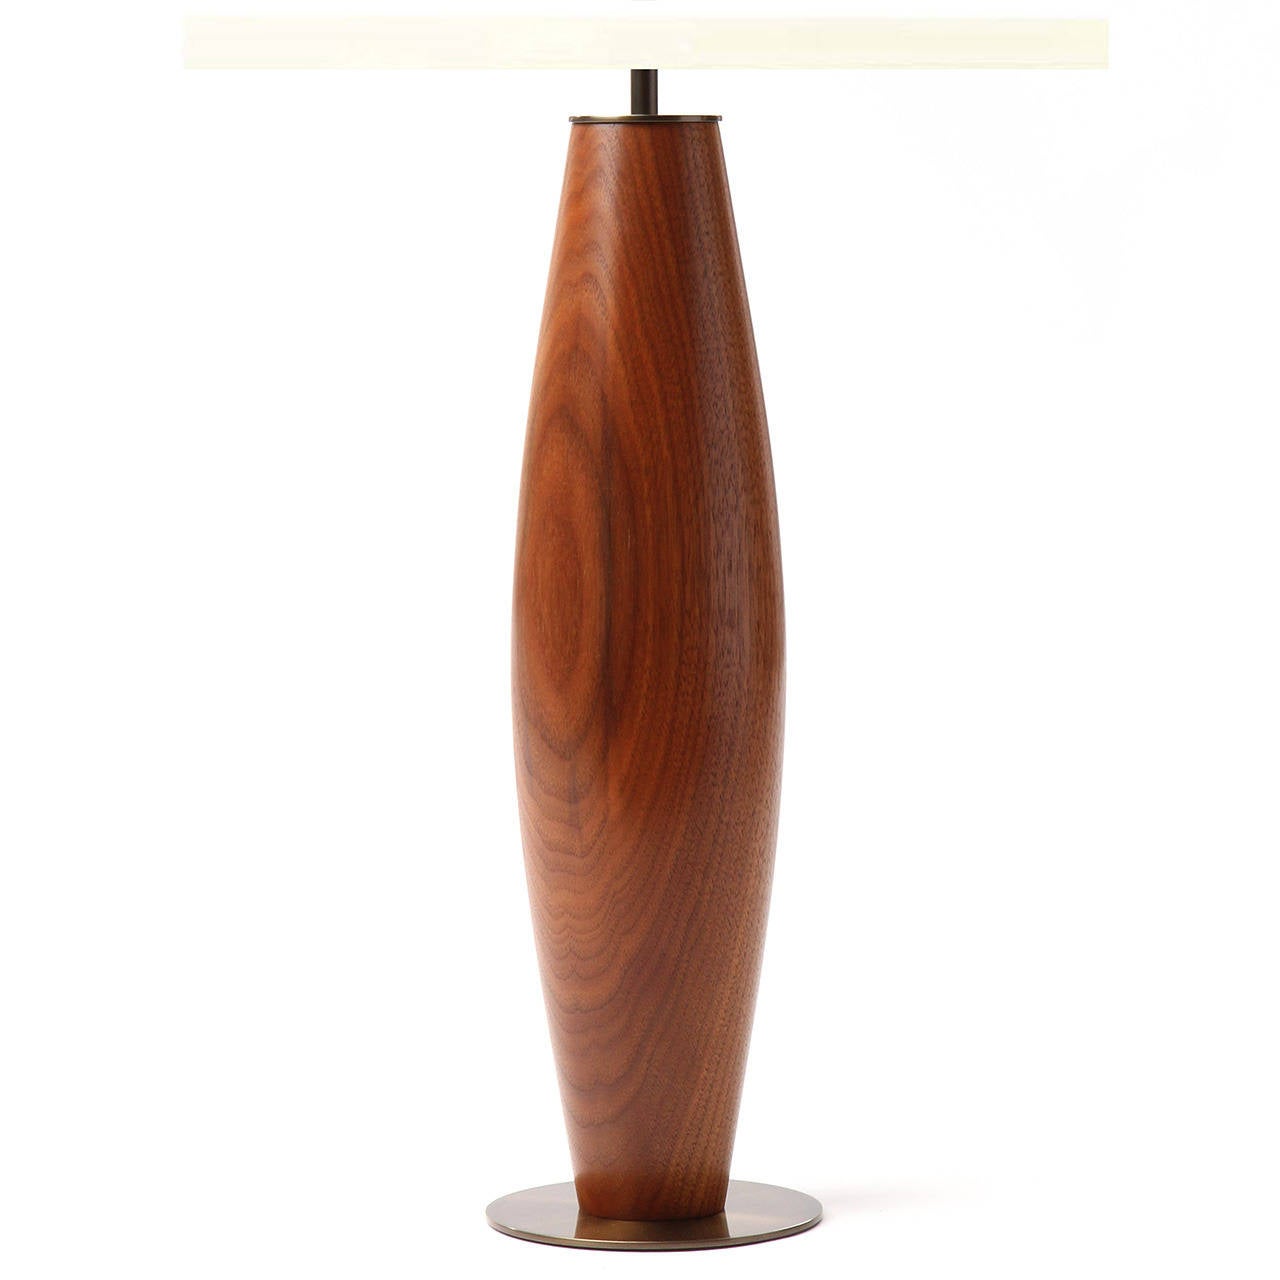 A table lamp turned from a solid piece of vividly grained teak. The base is 19.5